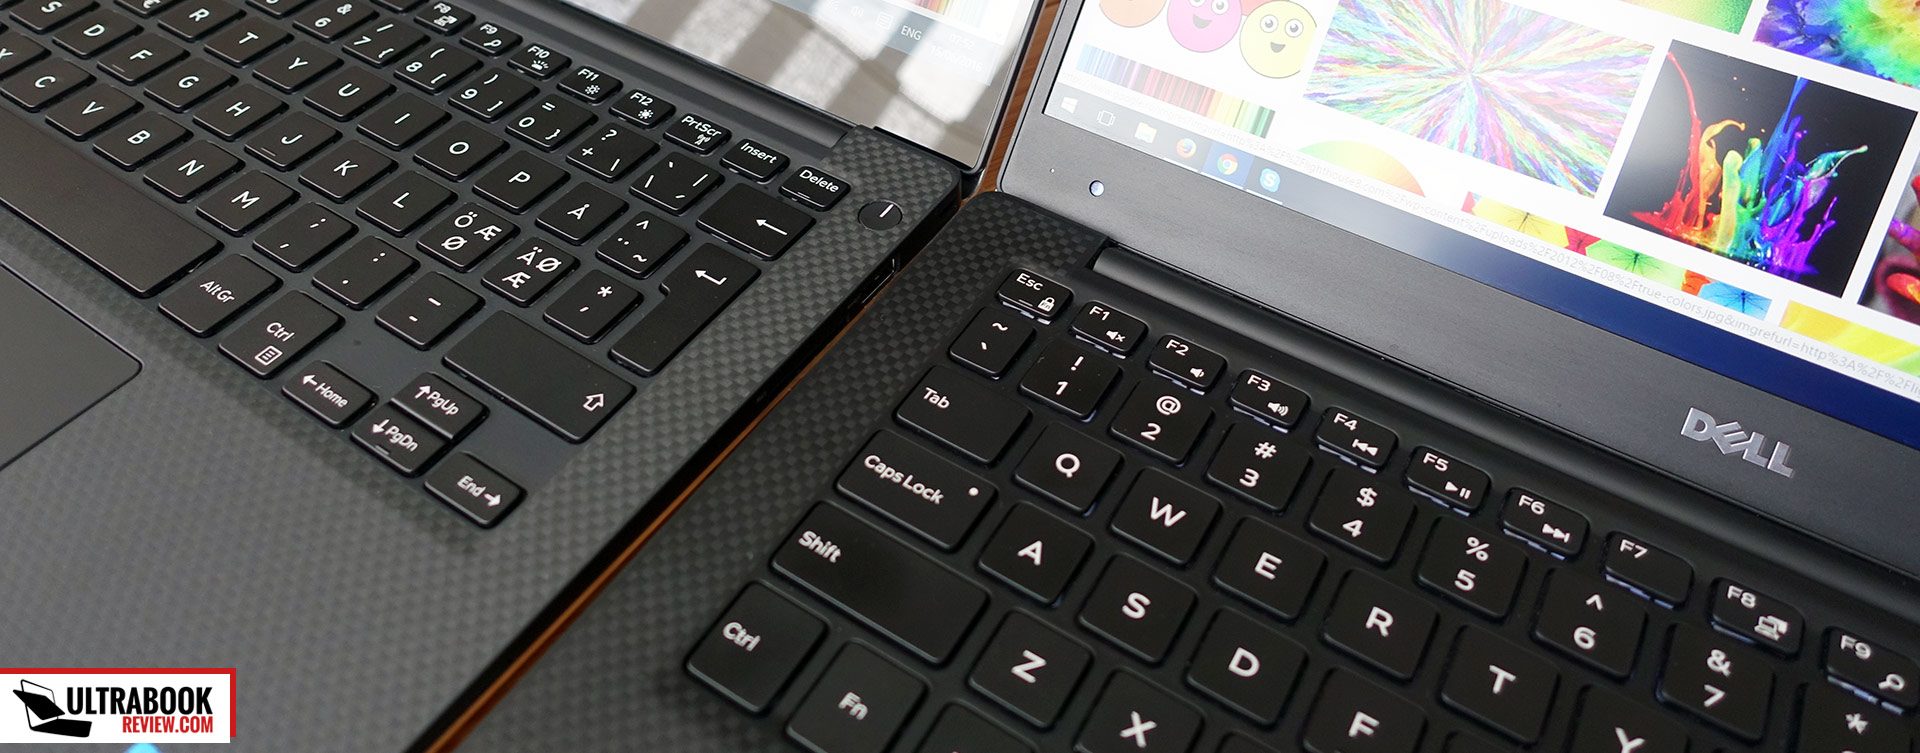 The keyboard and trackpad are the same on the two XPSs